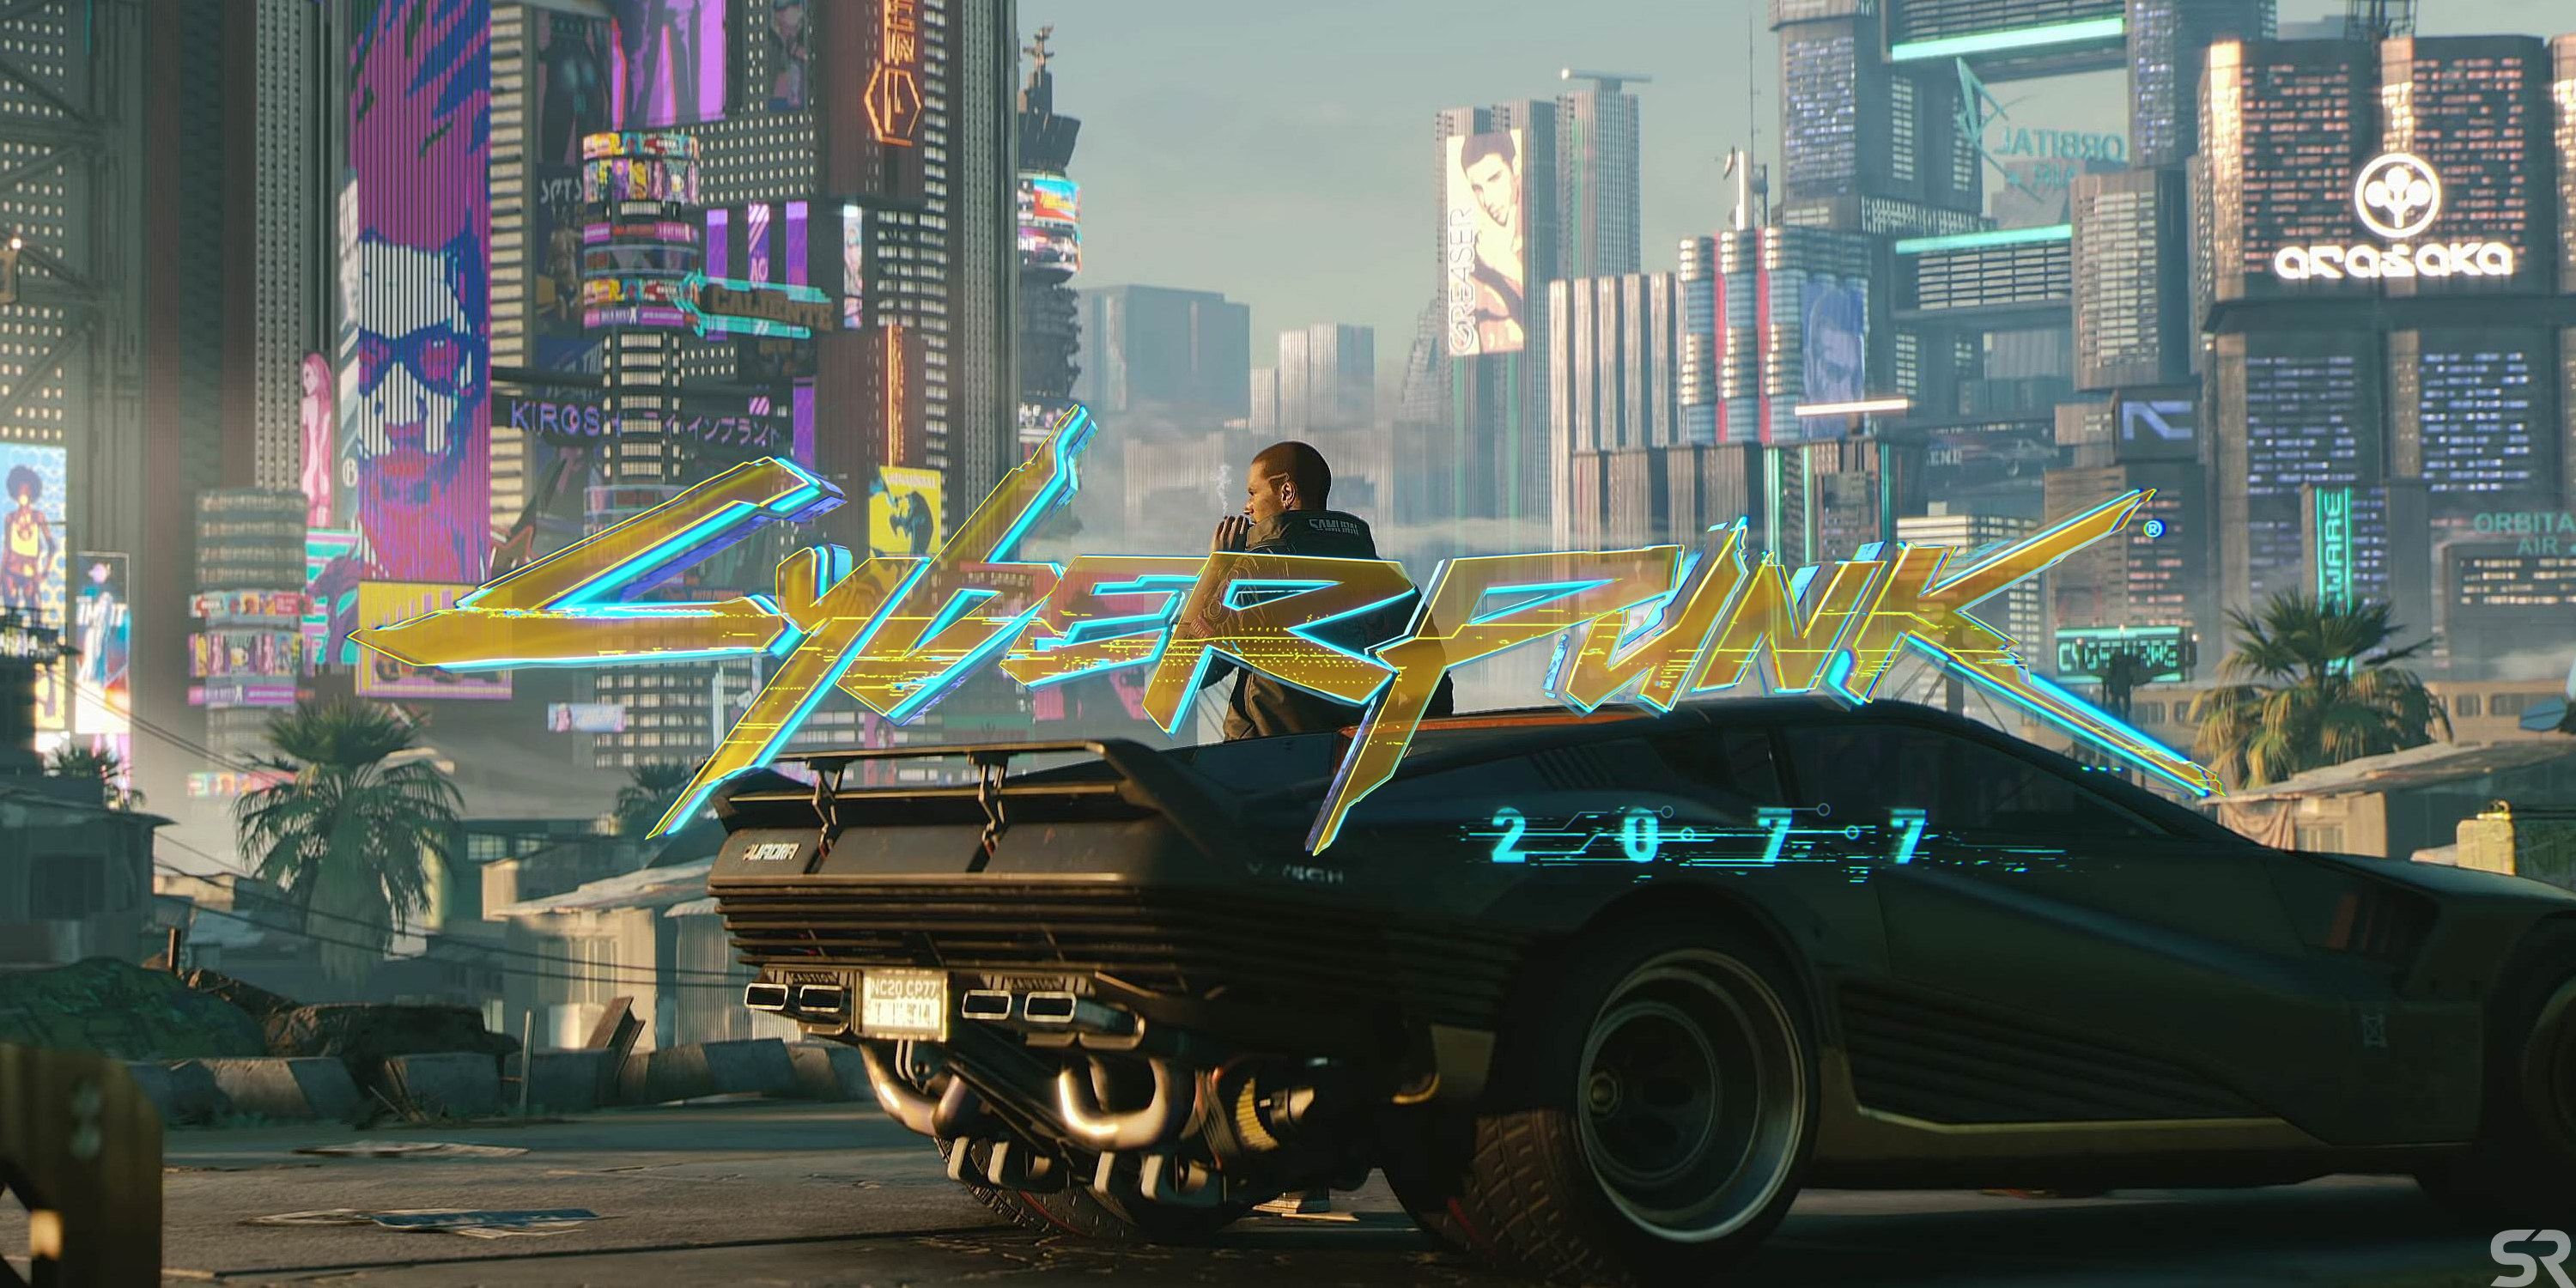 Cyberpunk 2077 Confirmed by CD Projekt Red to Be at E3 2019